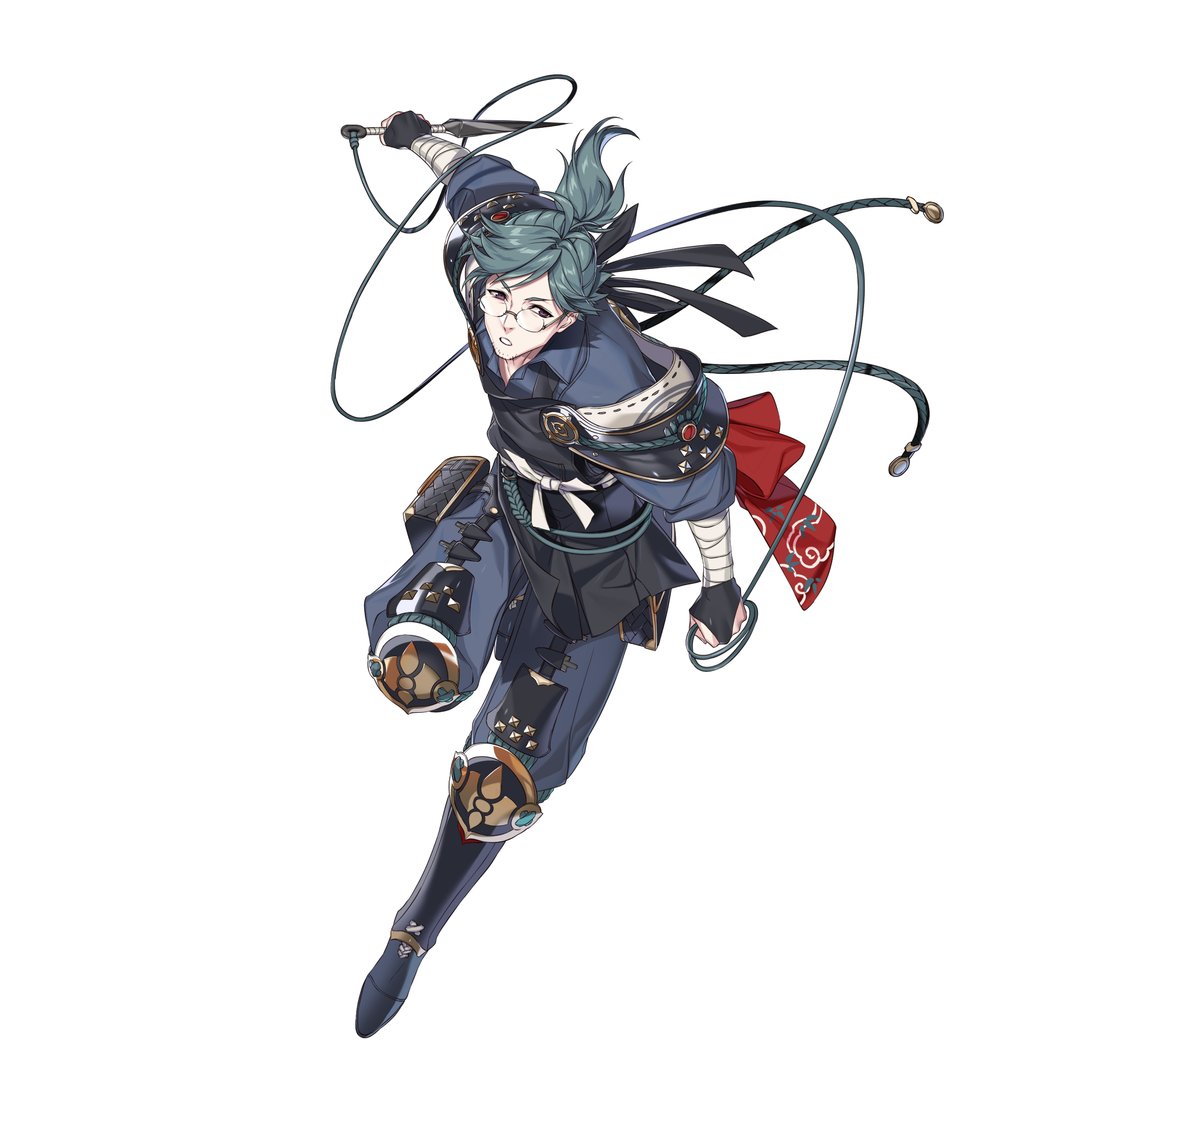 Meet Yukimura: Puppet Master from the #FireEmblem Fates games. Tactician in the service of Queen Mikoto of Hoshido. Uses automatons to do battle. #FEHeroes guide.fire-emblem-heroes.com/en-US/11003004…